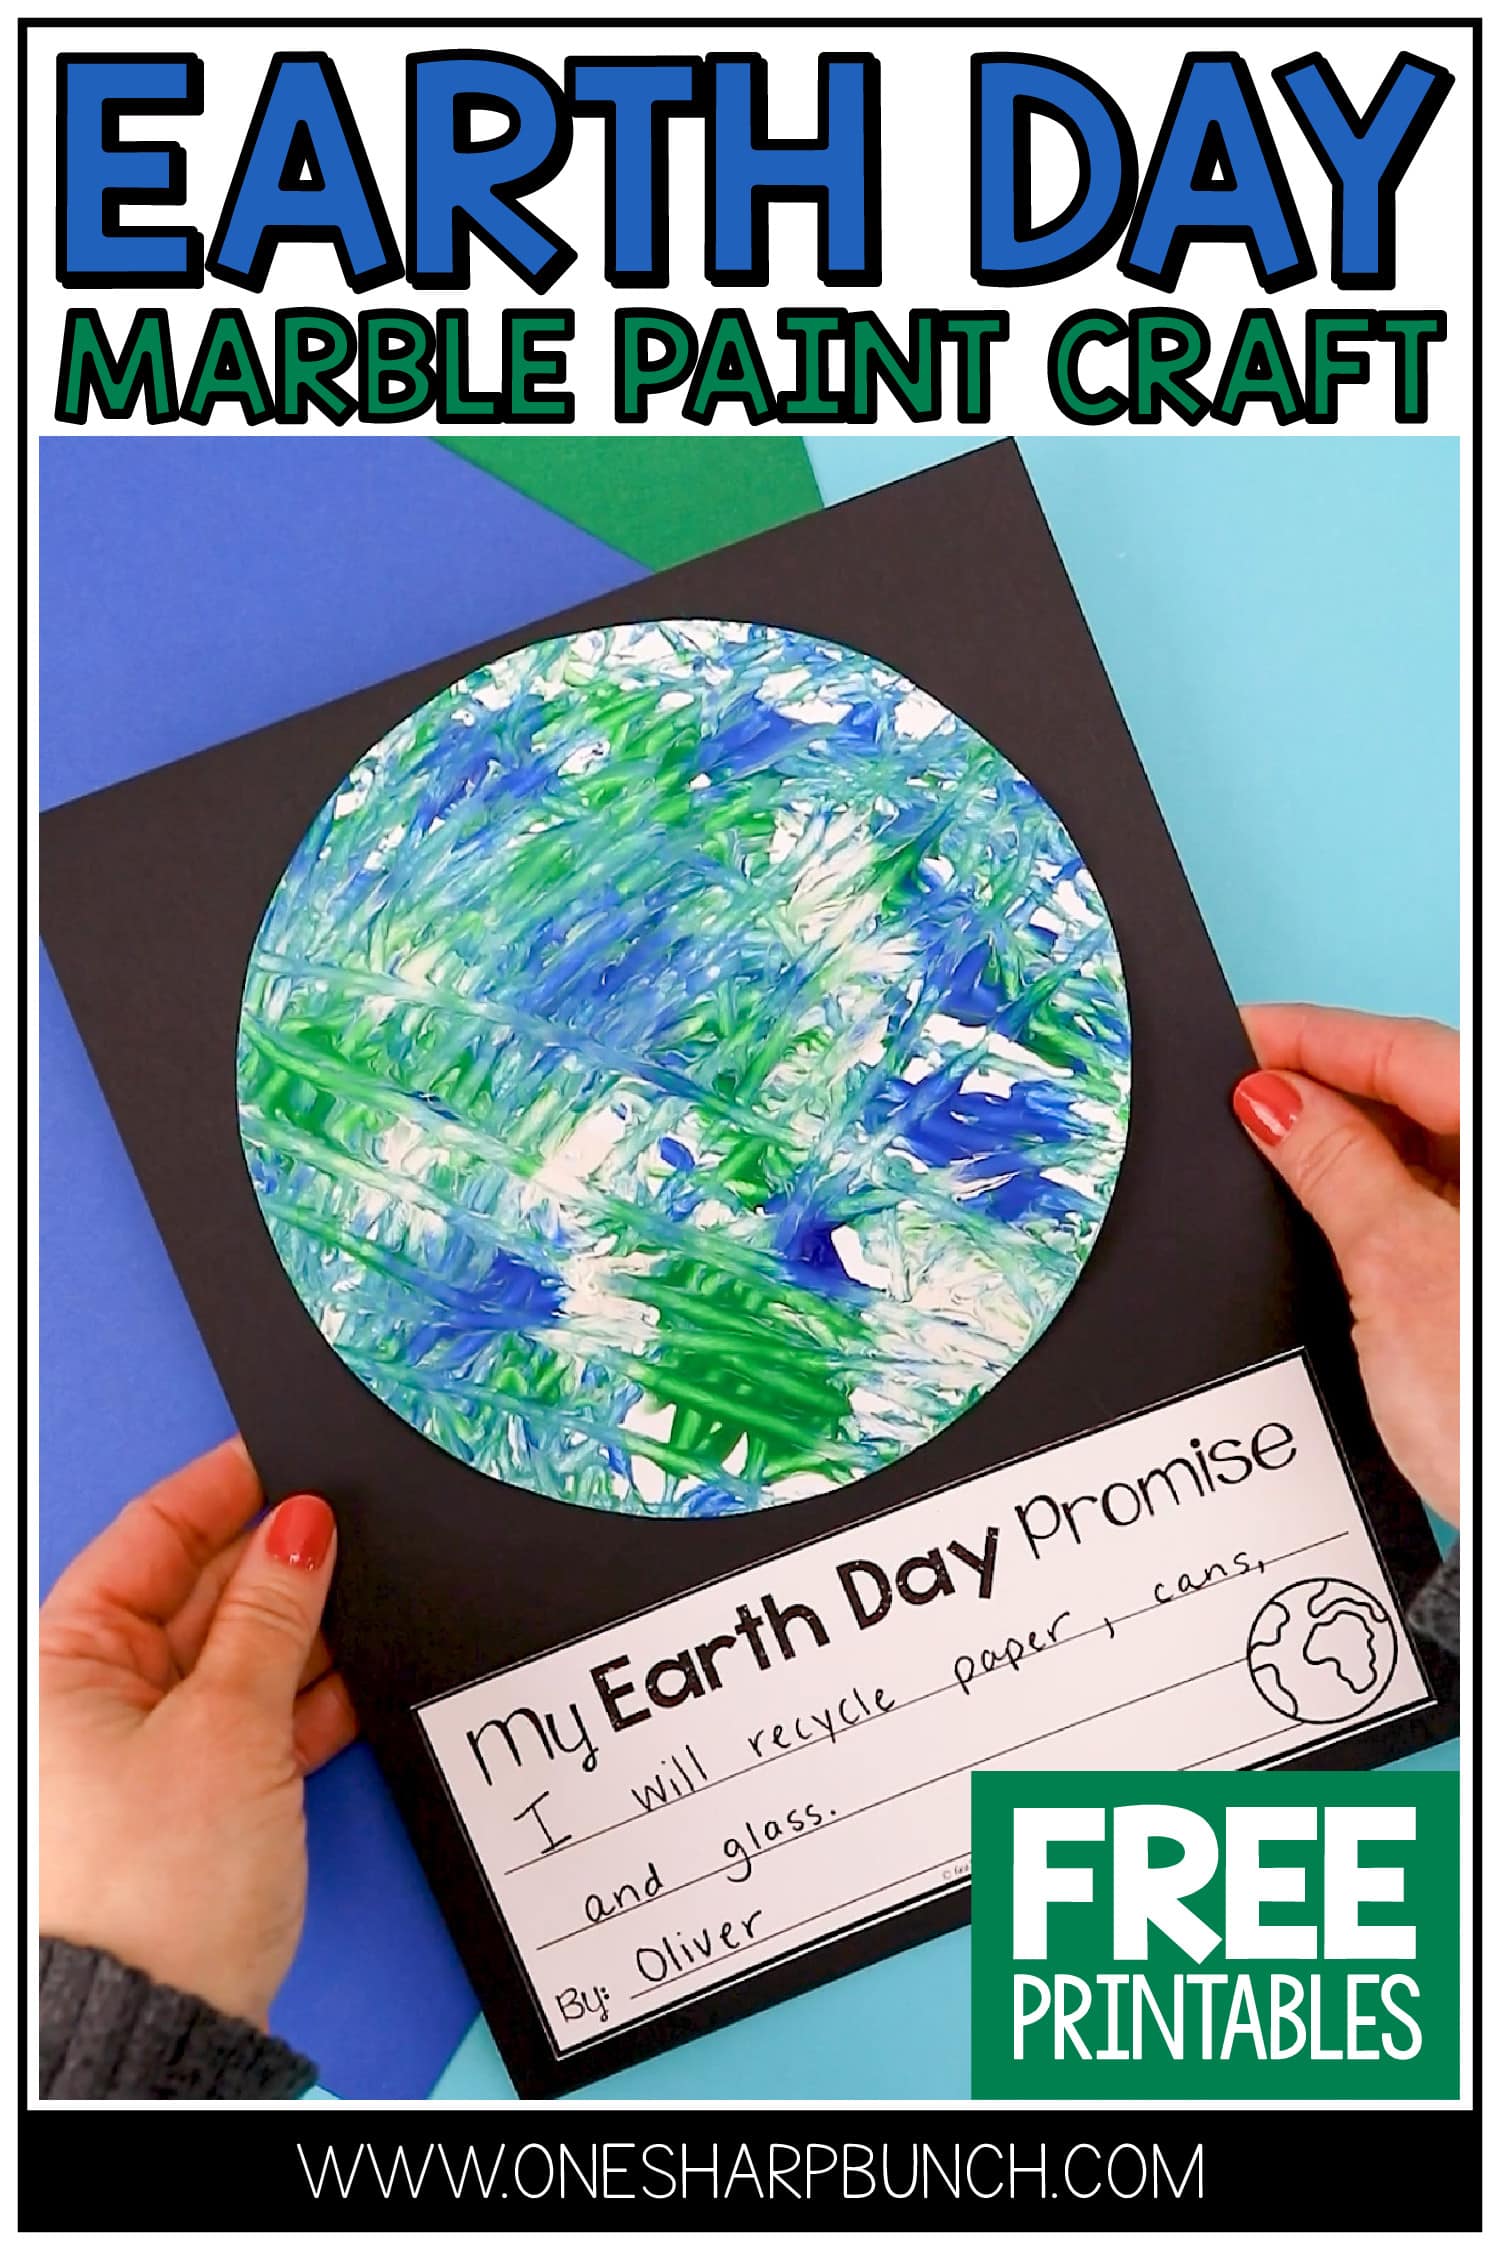 Celebrate Earth Day with this one-of-a-kind marble painted Earth Day craft for Preschool, PreK, Kindergarten and 1st Grade students! After creating their Earth painting, the students will write a promise to protect the Earth. This Earth craft pairs well with any of your favorite Earth Day books, Earth Day activities and Earth Day poems! Grab the "Earth Day Promise" writing prompt for FREE!